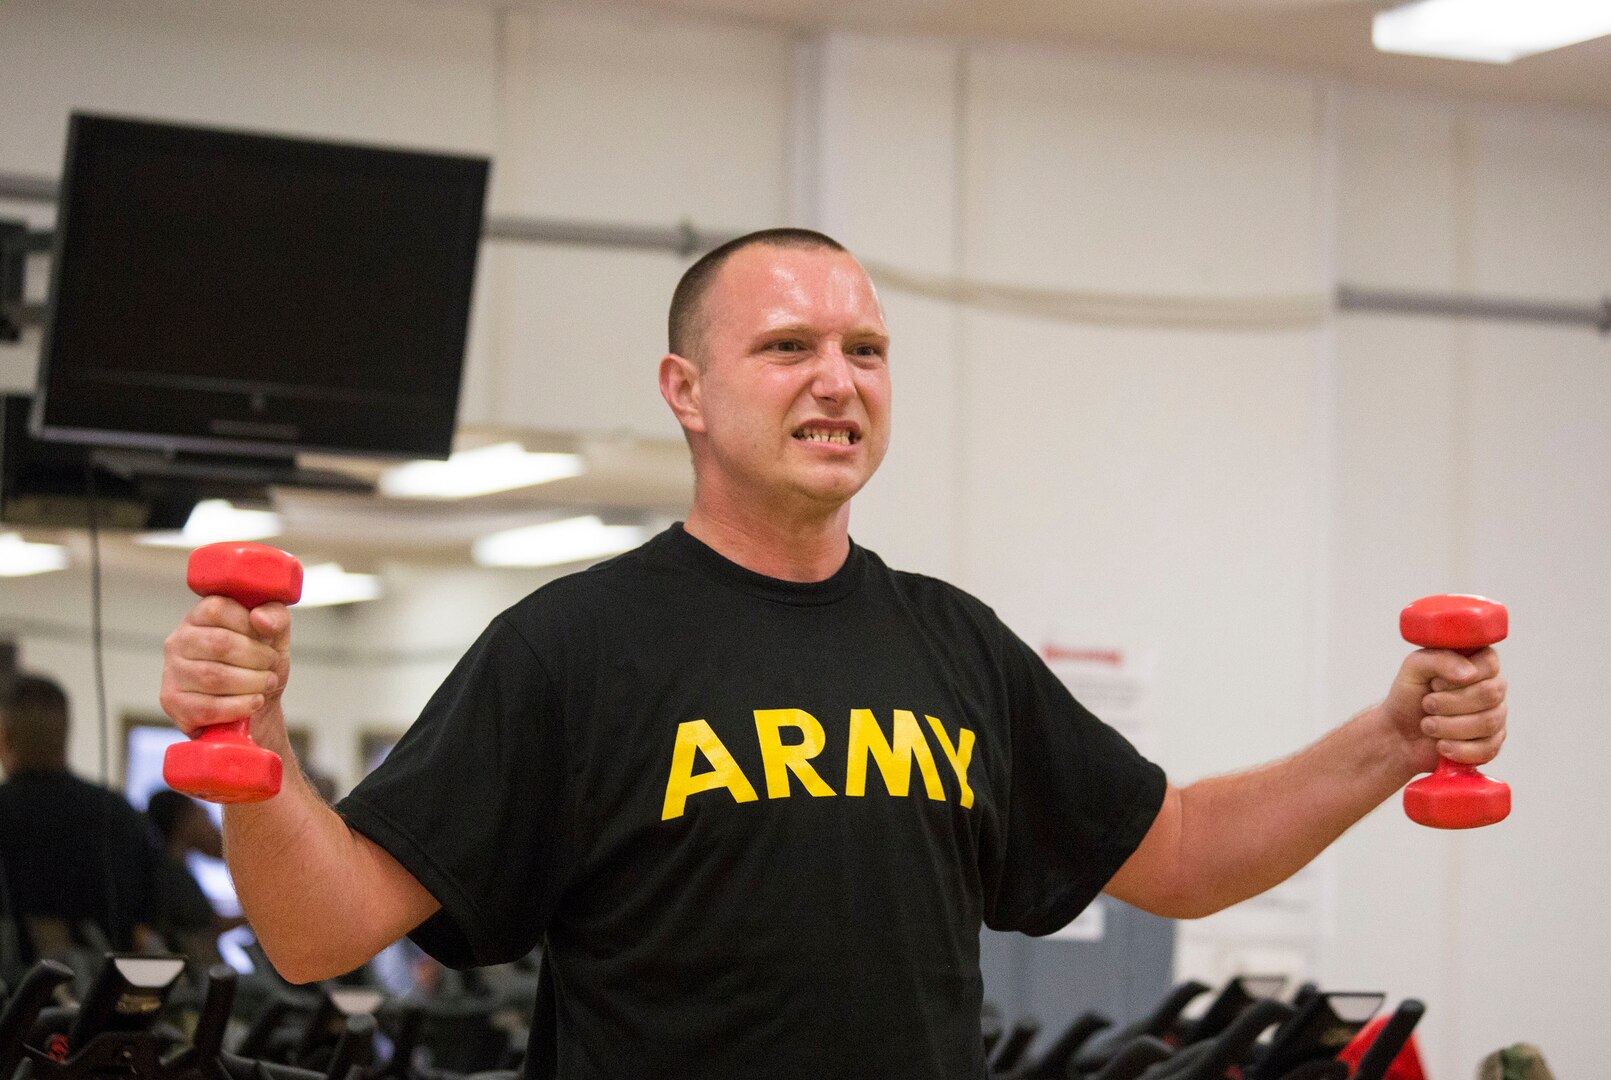 Sgt. Richard Hutton, a student with the New Jersey National Guard SWEAT Program, takes part in a workout at Joint Base McGuire-Dix-Lakehurst on July 24, 2018. SWEAT stands for Soldier Wellness Education and Training and is designed to help Soldiers whose careers have been set back – or will end prematurely – unless they improve their physical fitness.